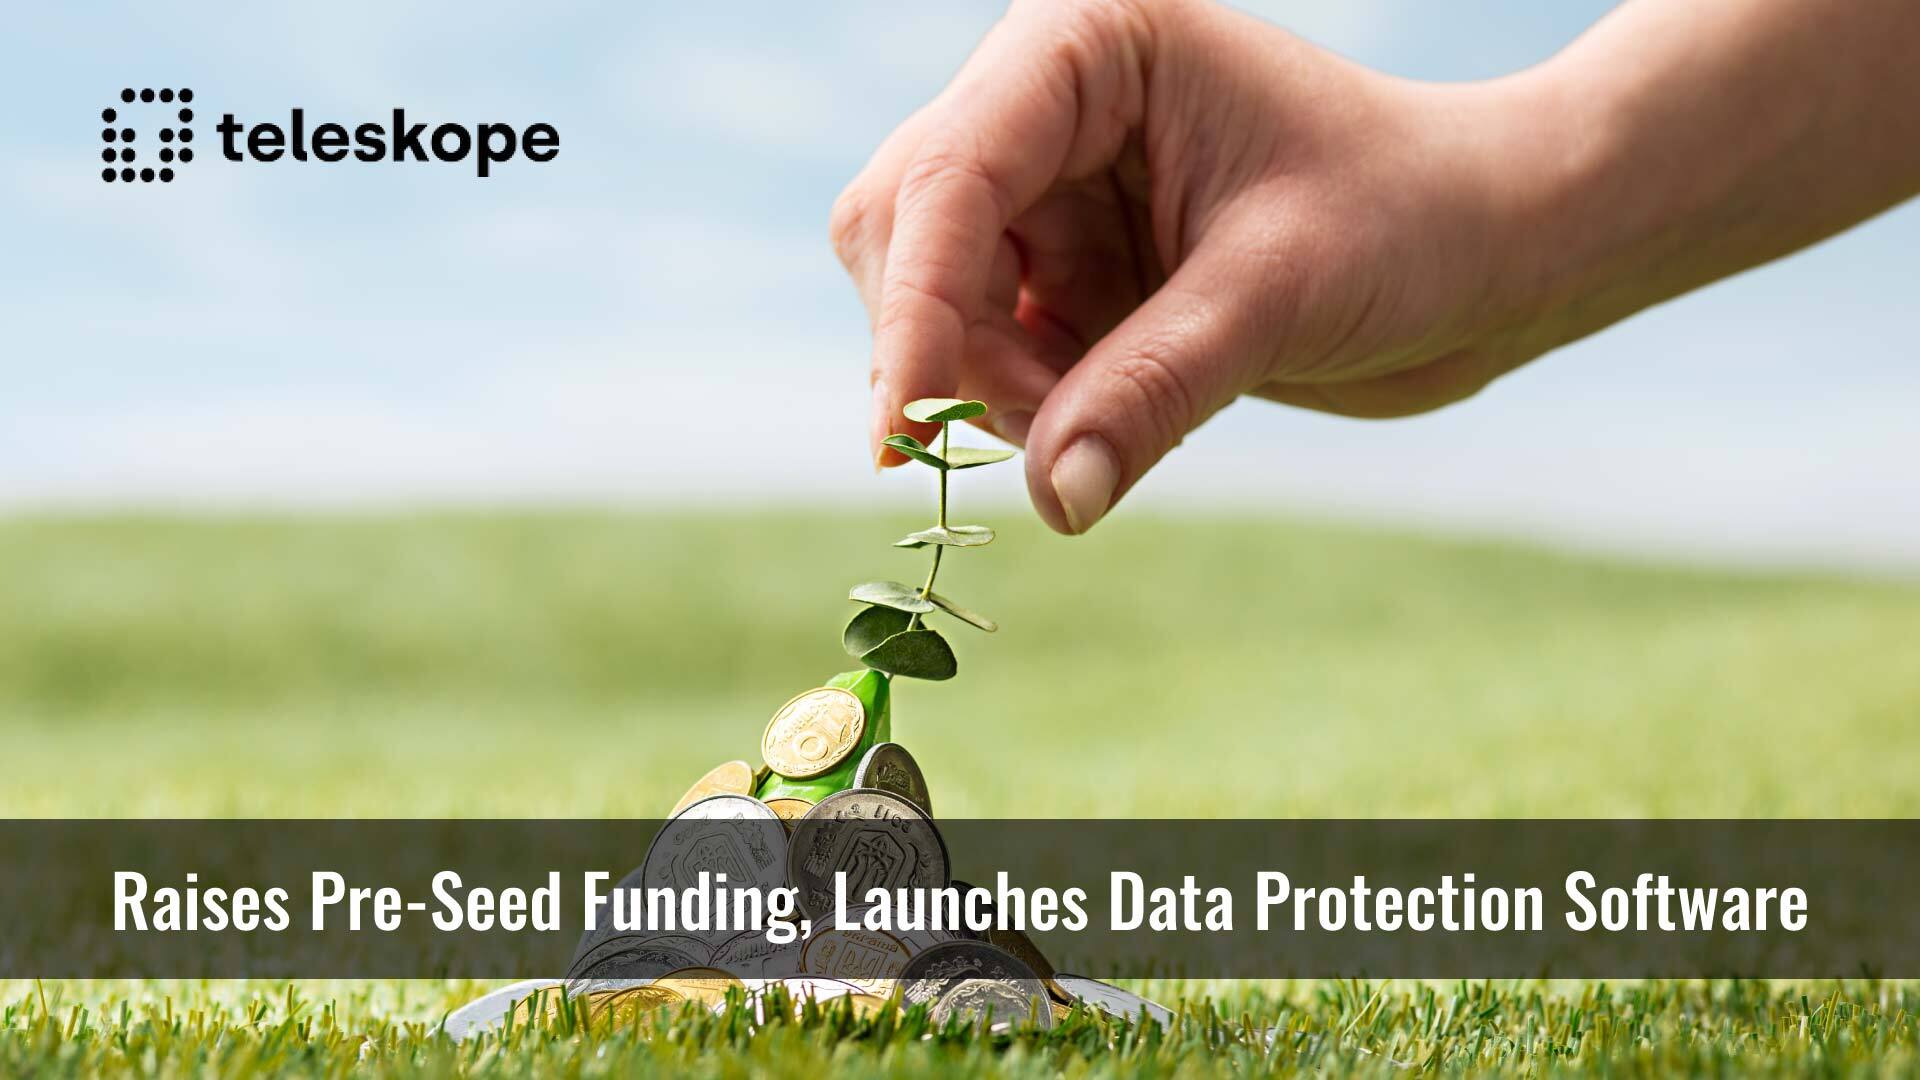 Data Security Startup Raises Pre-Seed Funding, Launches Data Protection Software Using Artificial Intelligence